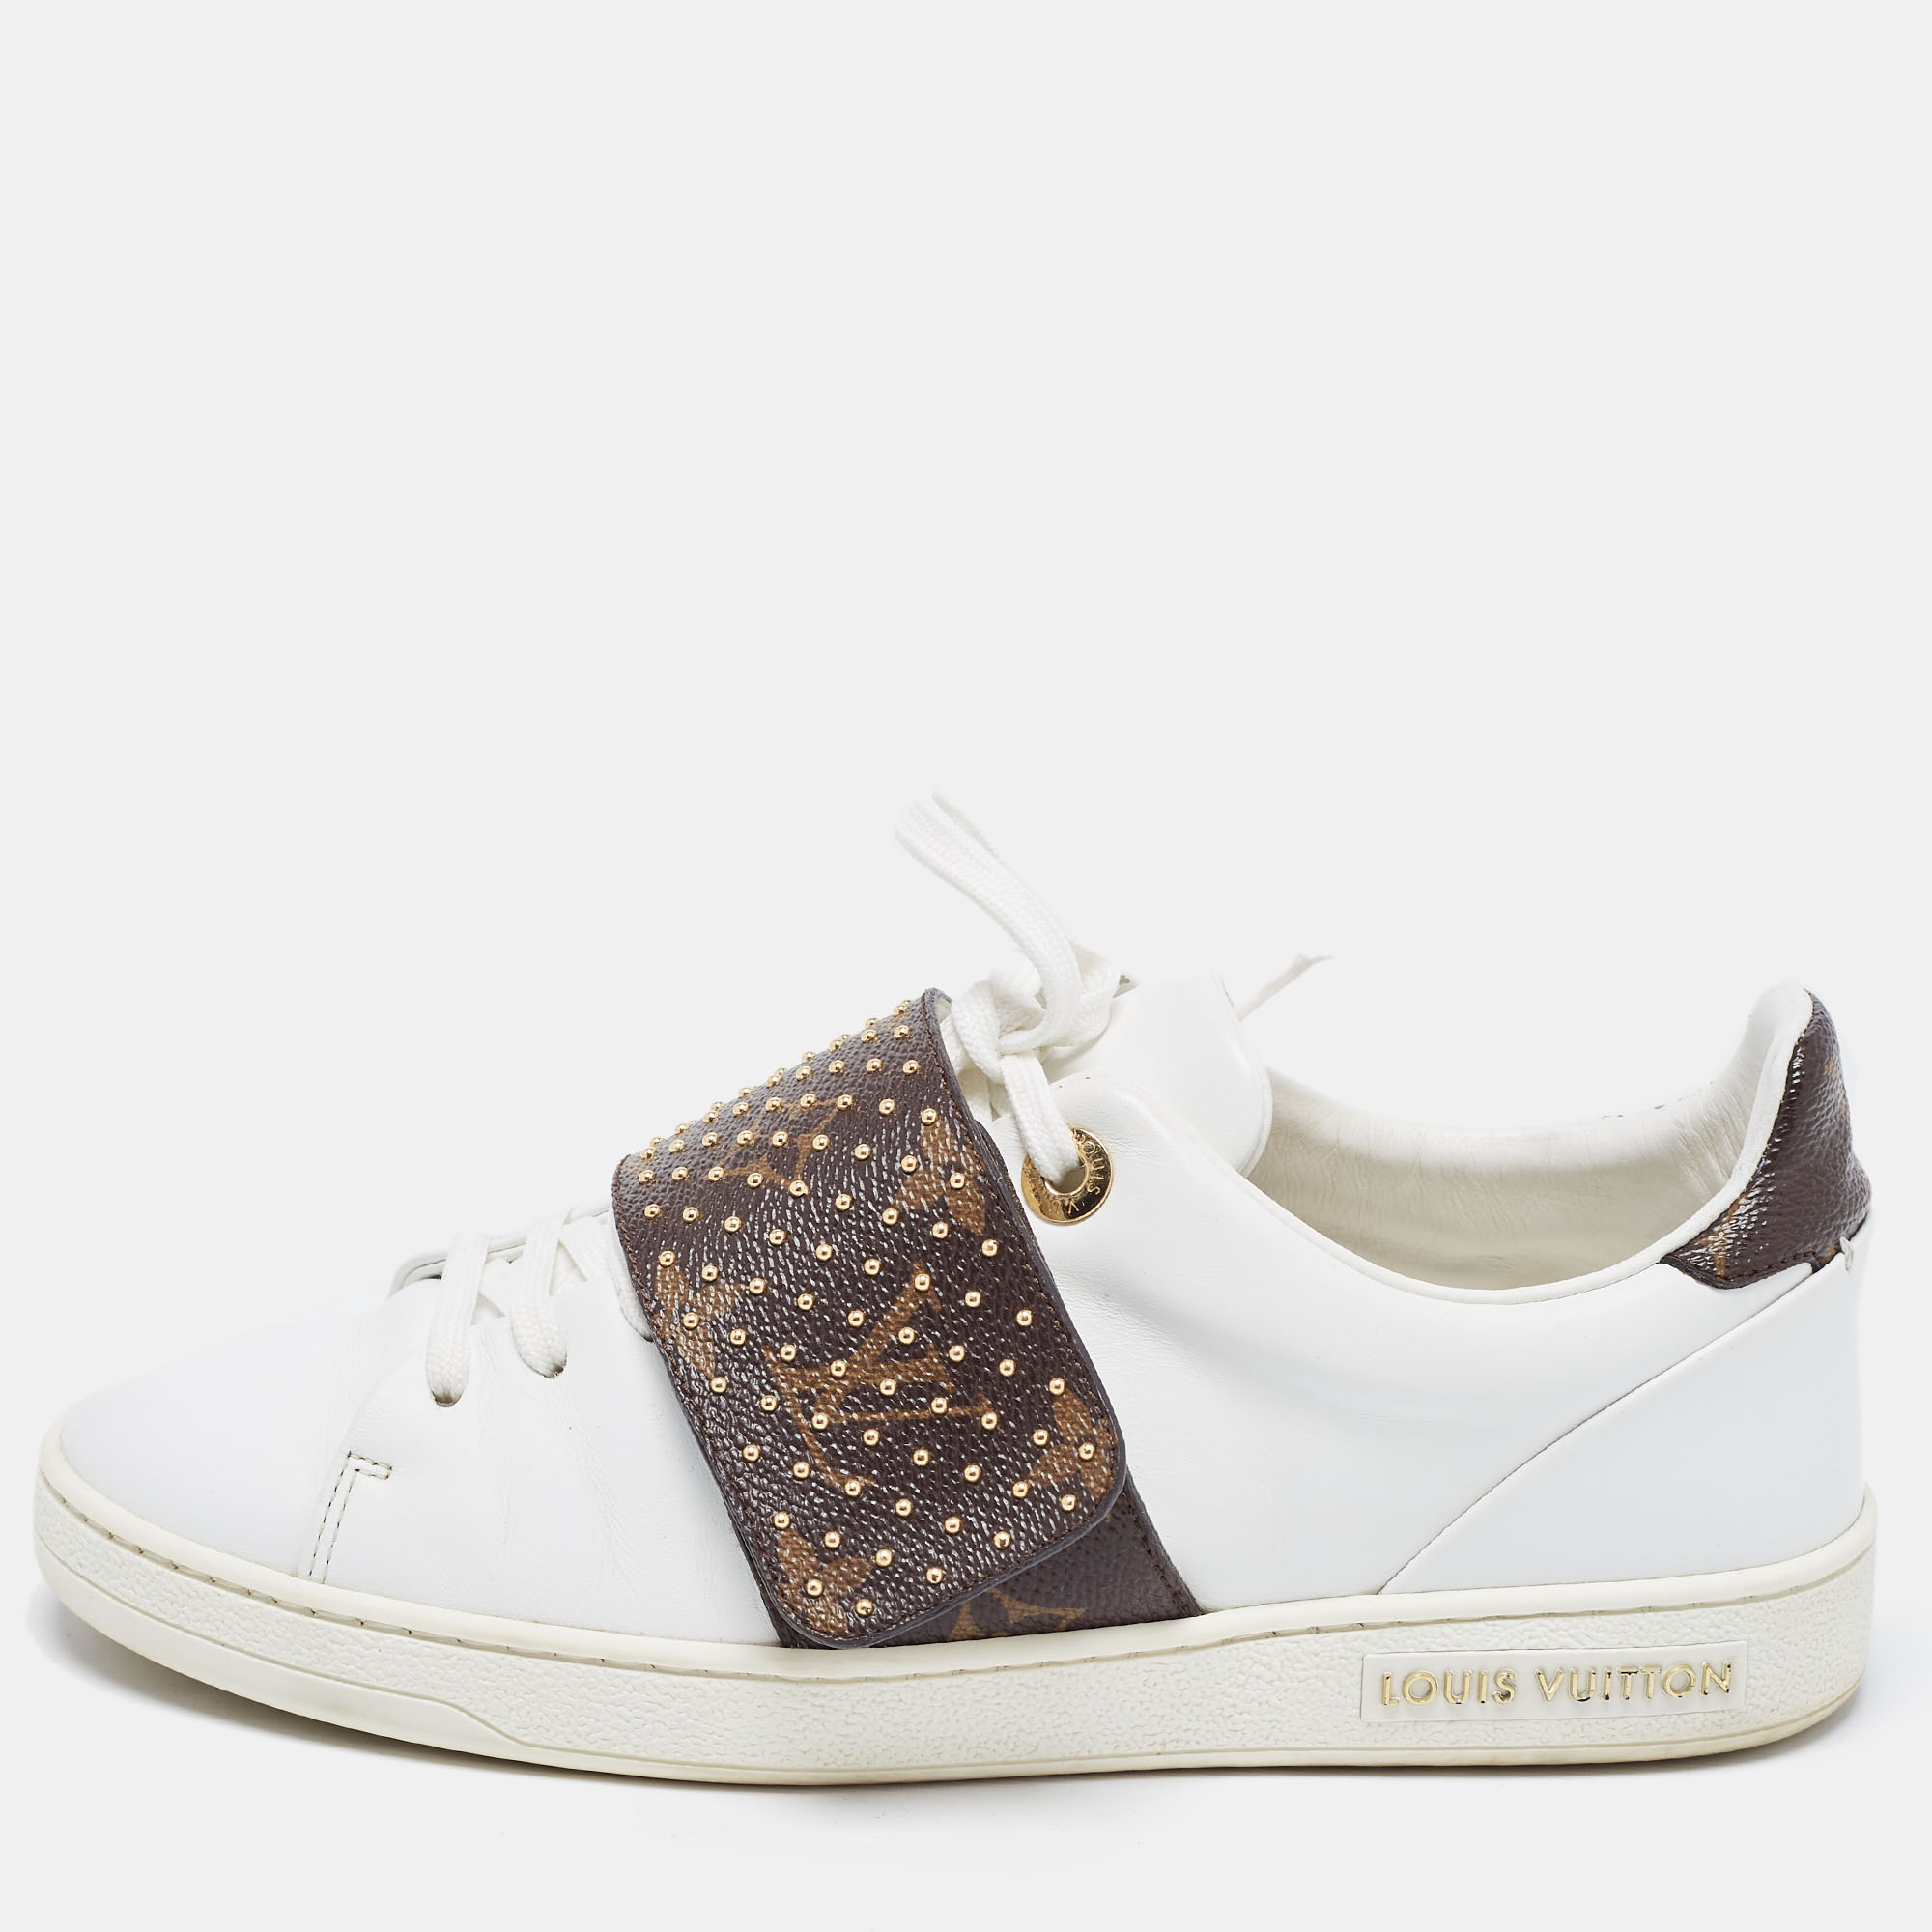 These LV sneakers represent the idea of luxe fashion. They are crafted from high quality materials and designed with nothing but style. A perfect fit for all casual occasions these sneakers will spruce up any look effortlessly.